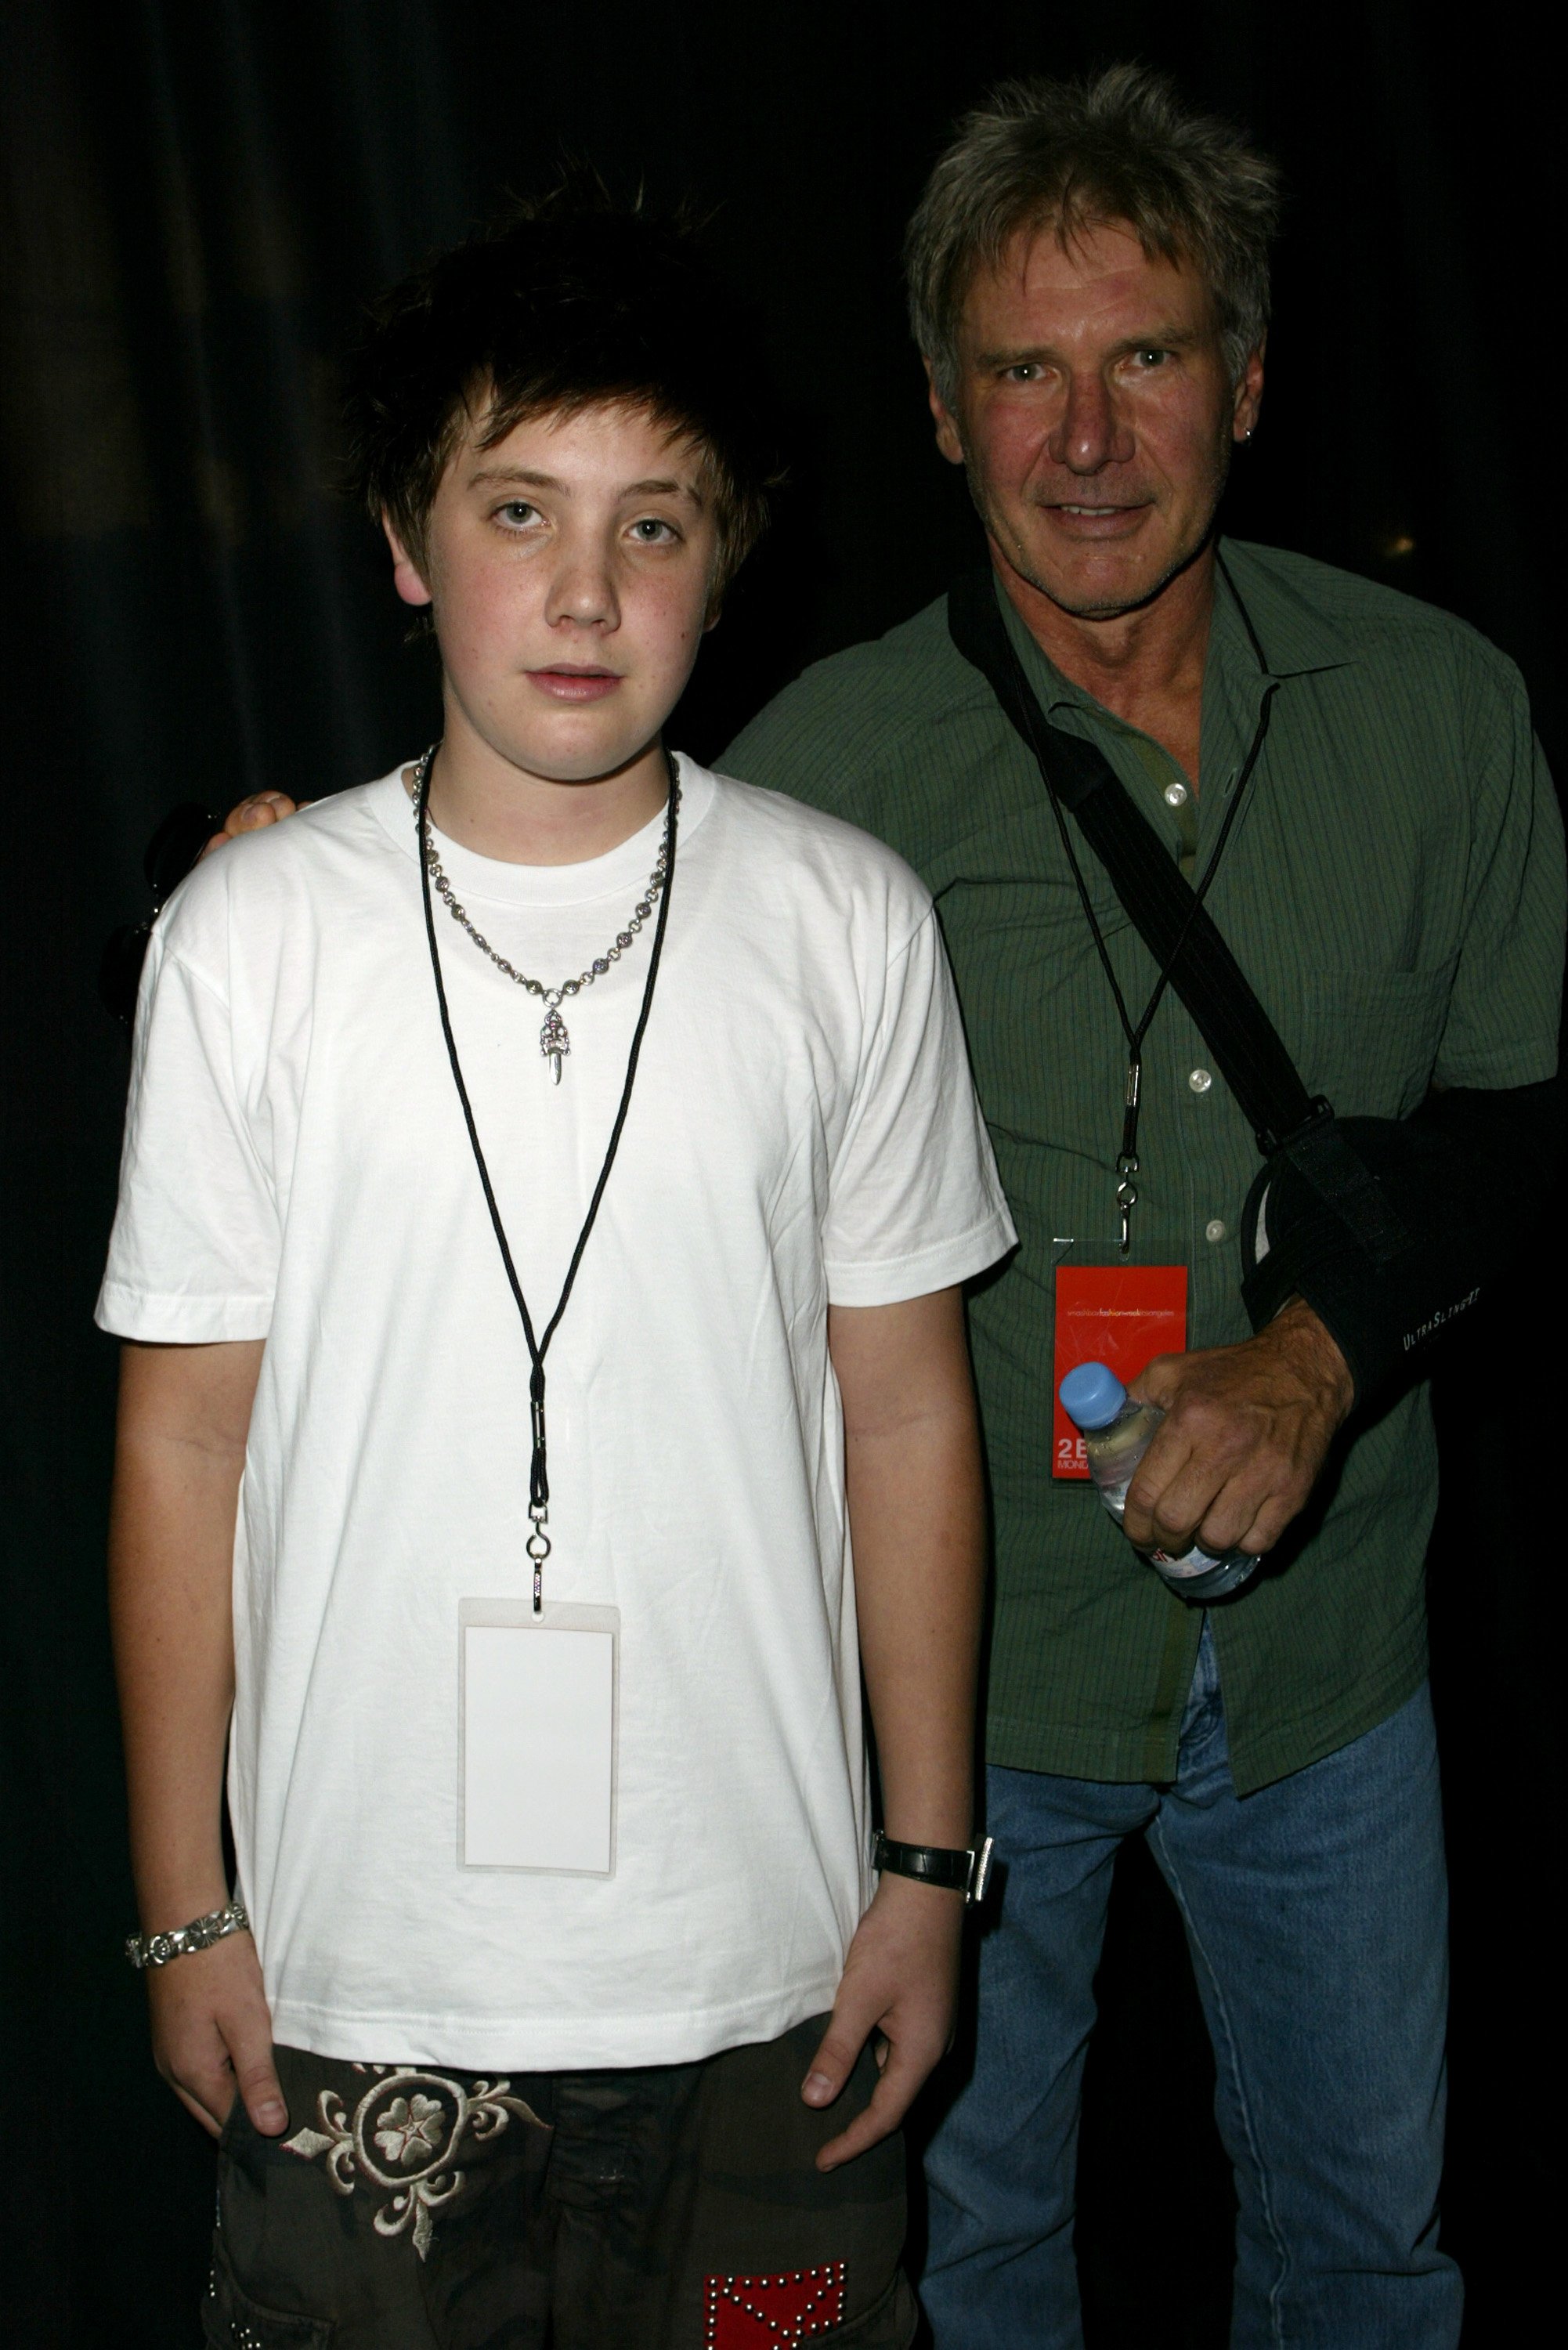 Malcolm and Harrison Ford at the Smashbox Fashion Week in Los Angeles on October 27, 2003. | Source: Jeff Vespa/WireImage/Getty Images